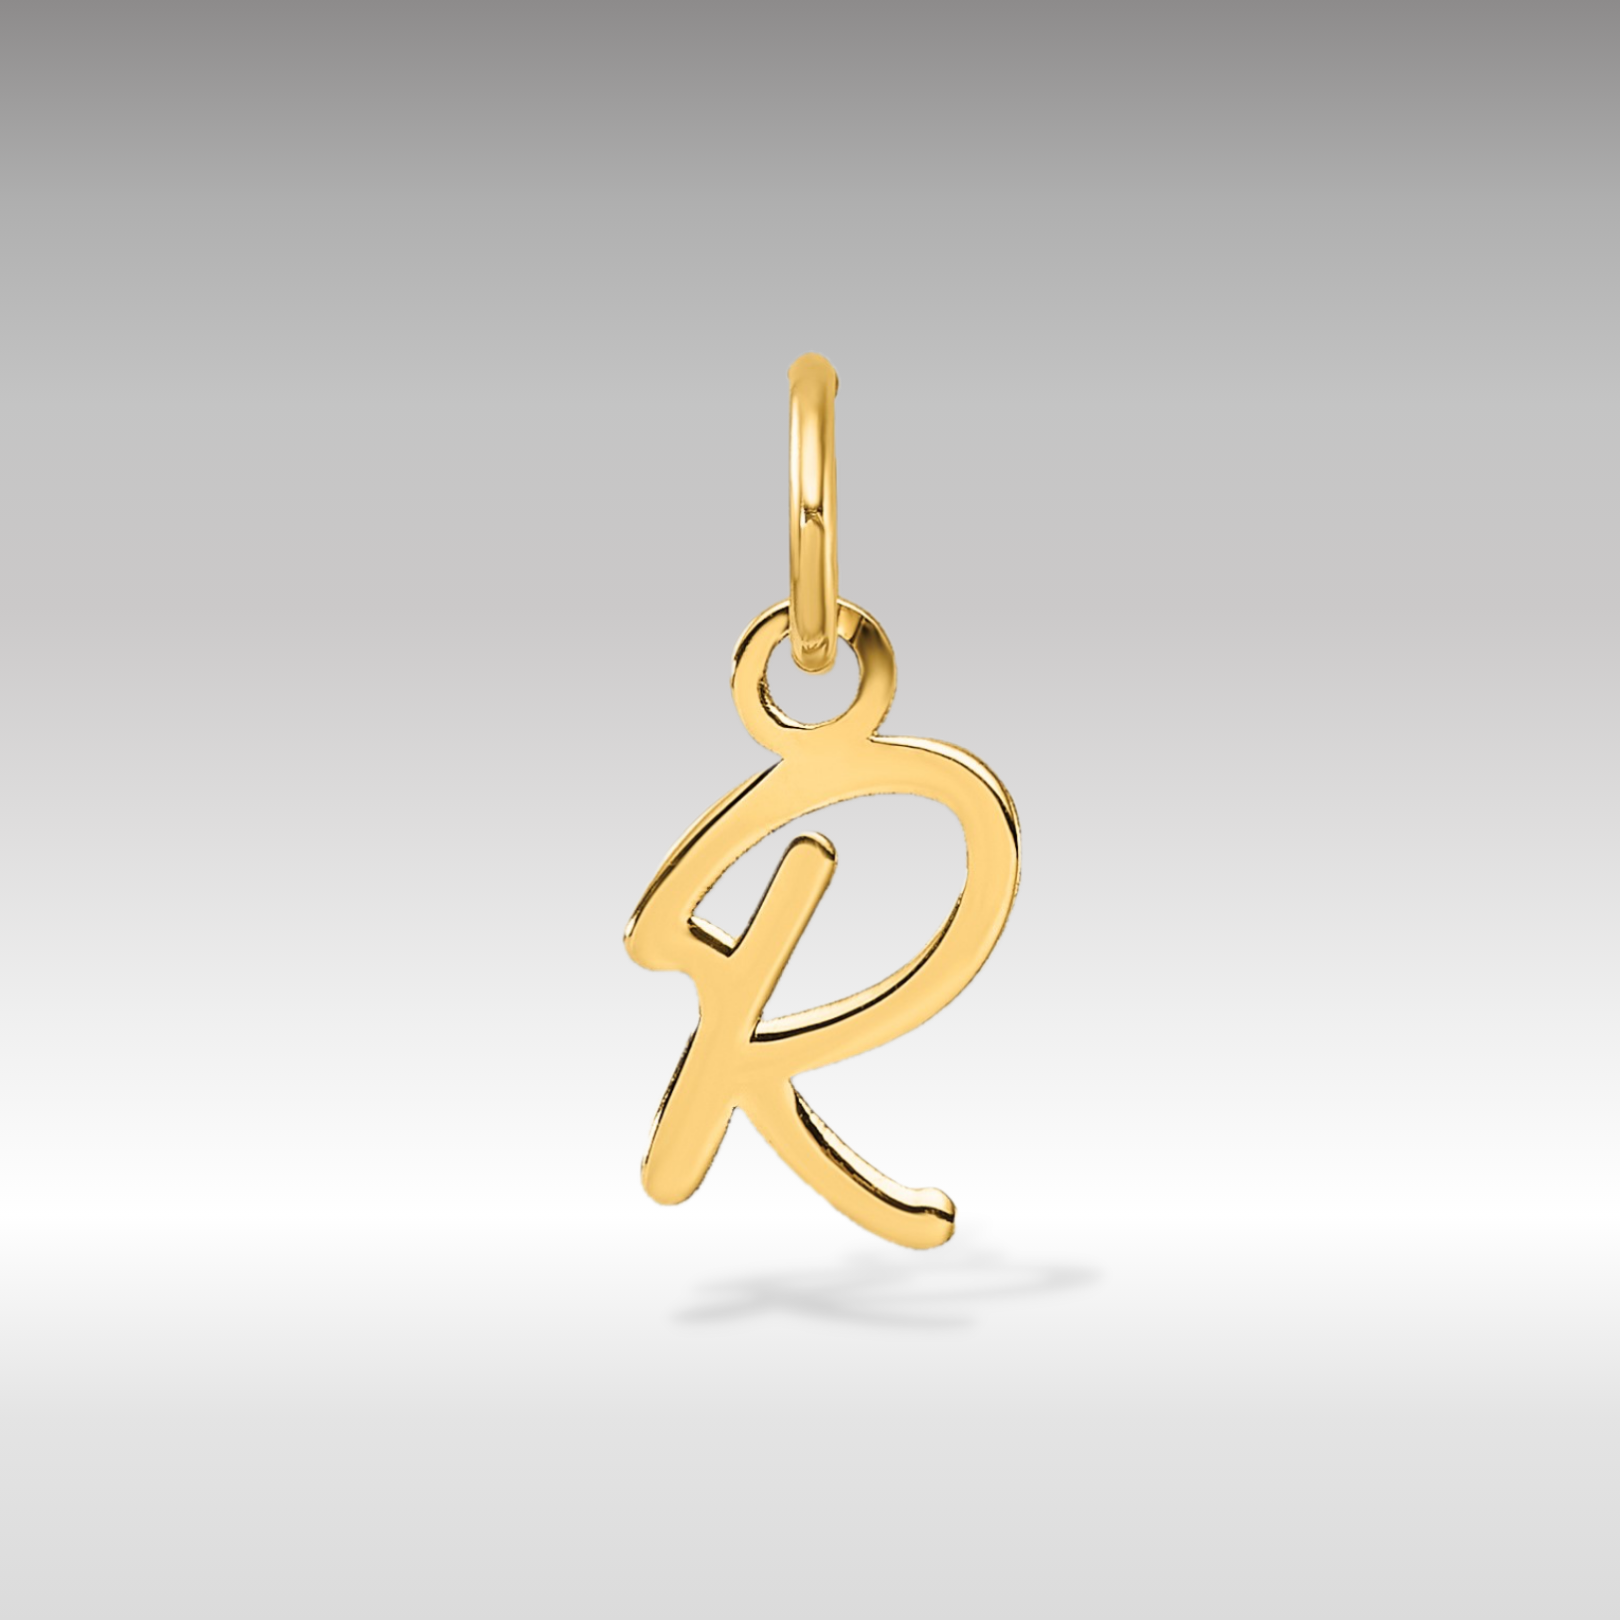 14K Gold Small Script Letter "R" Initial Pendant - Charlie & Co. Jewelry